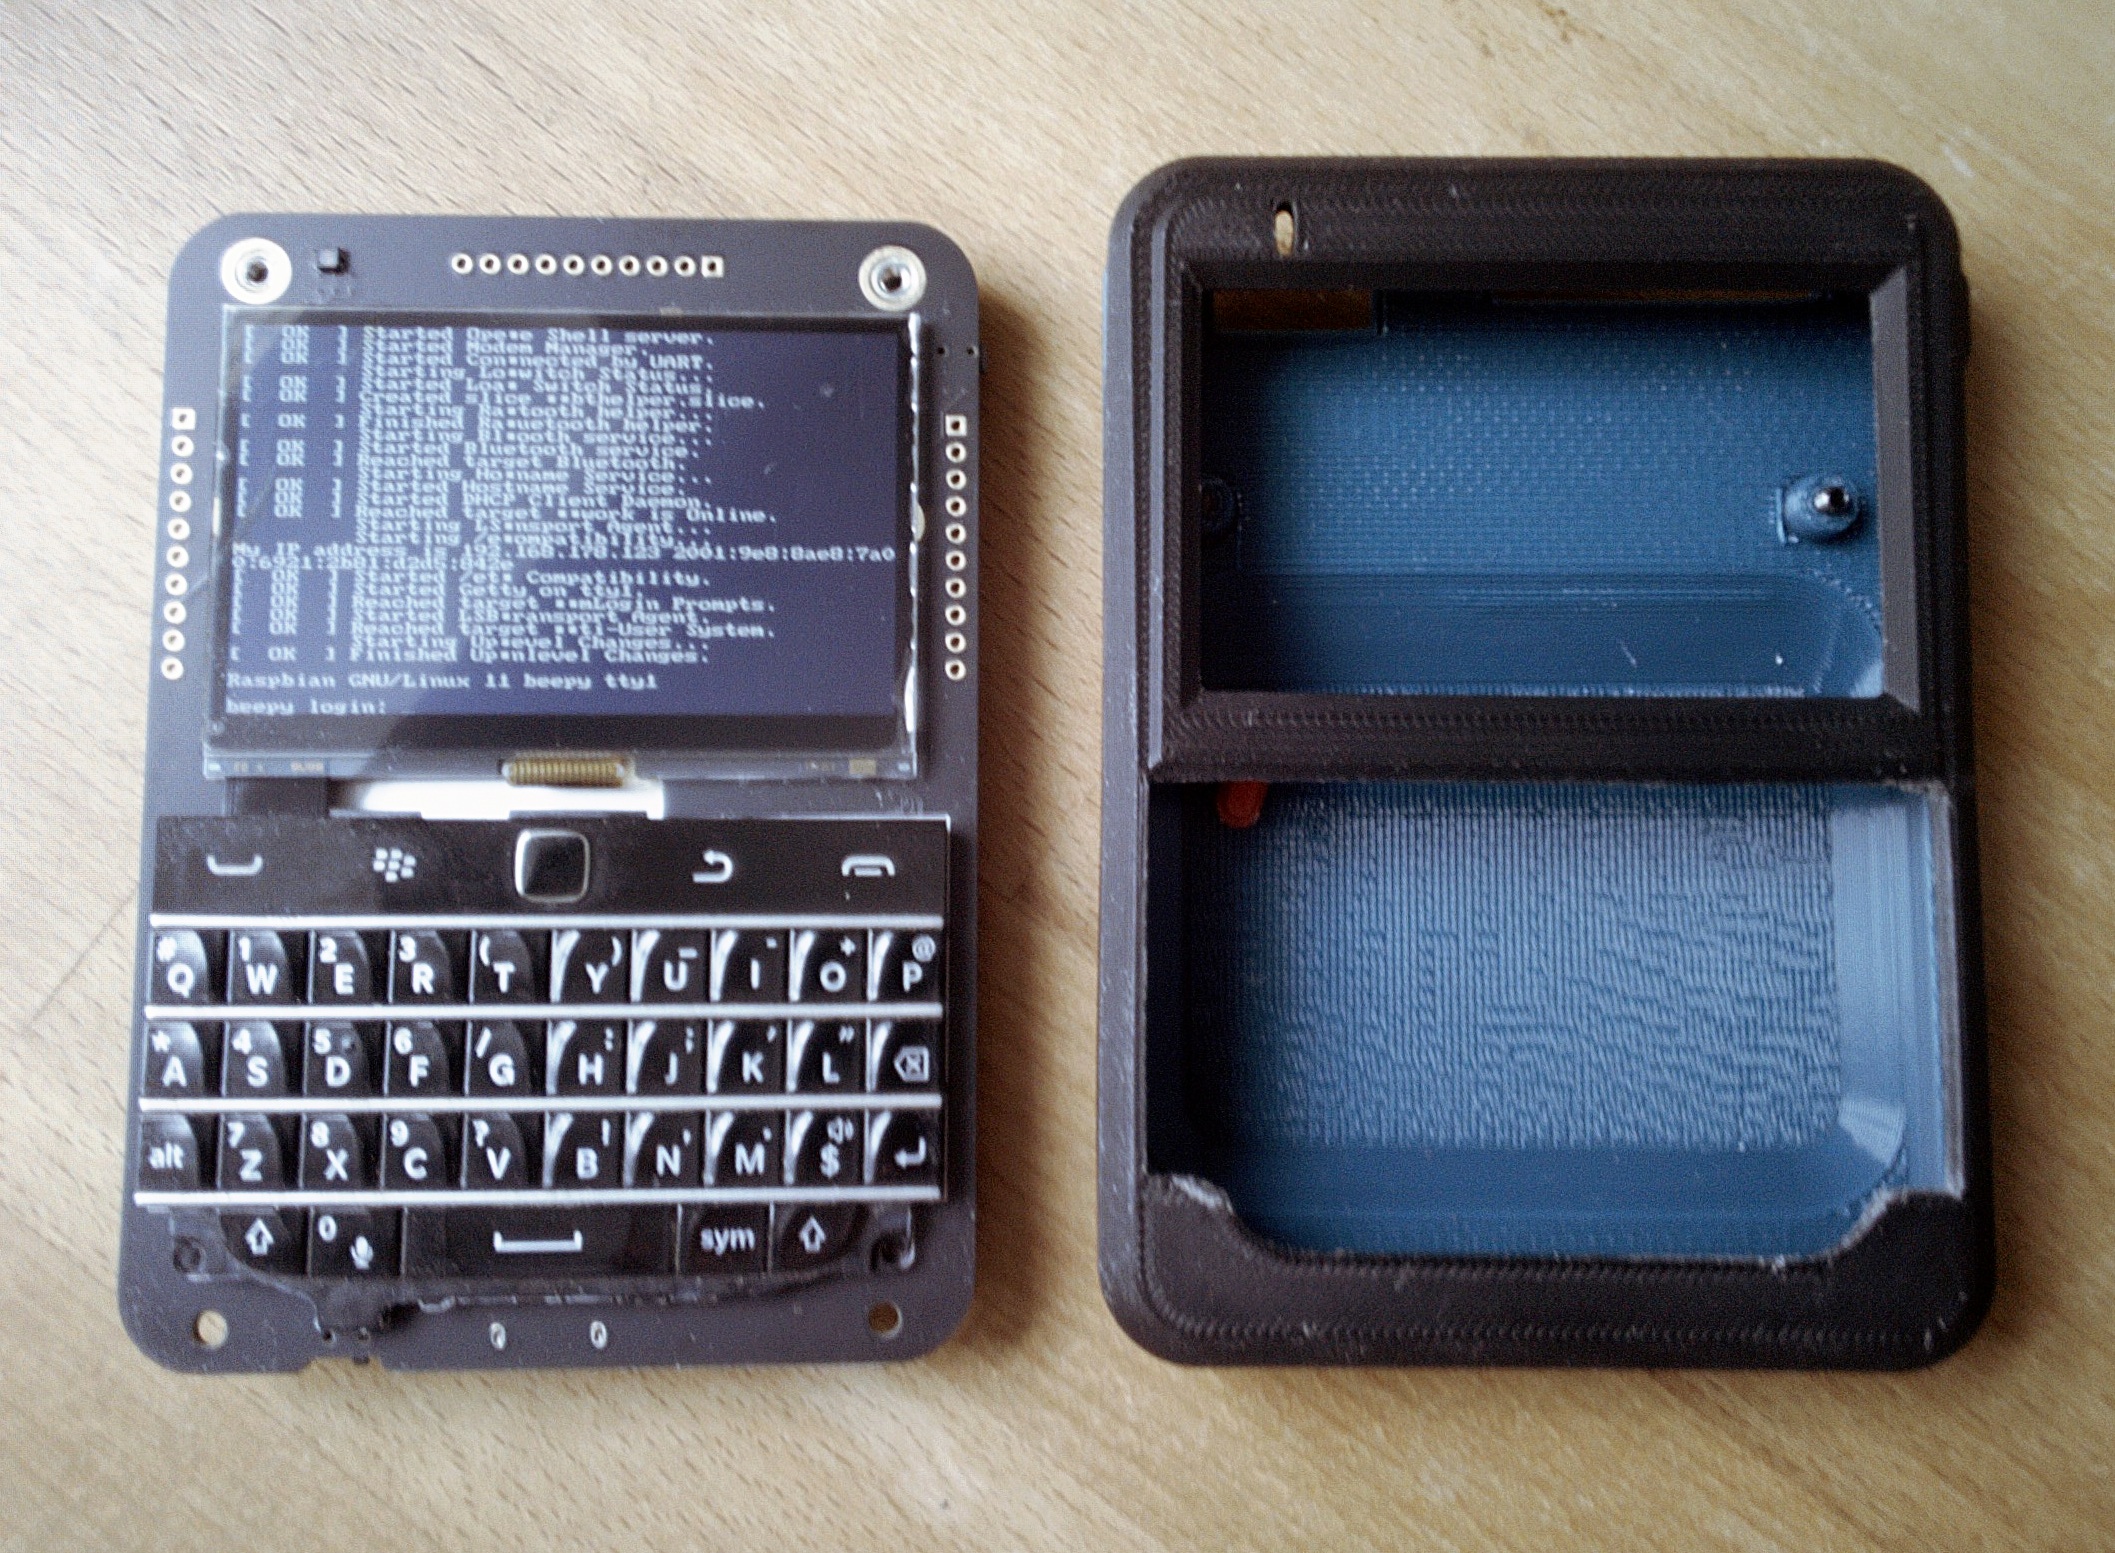 Beepy, next to a 3D printed case, photographed on PinePhone